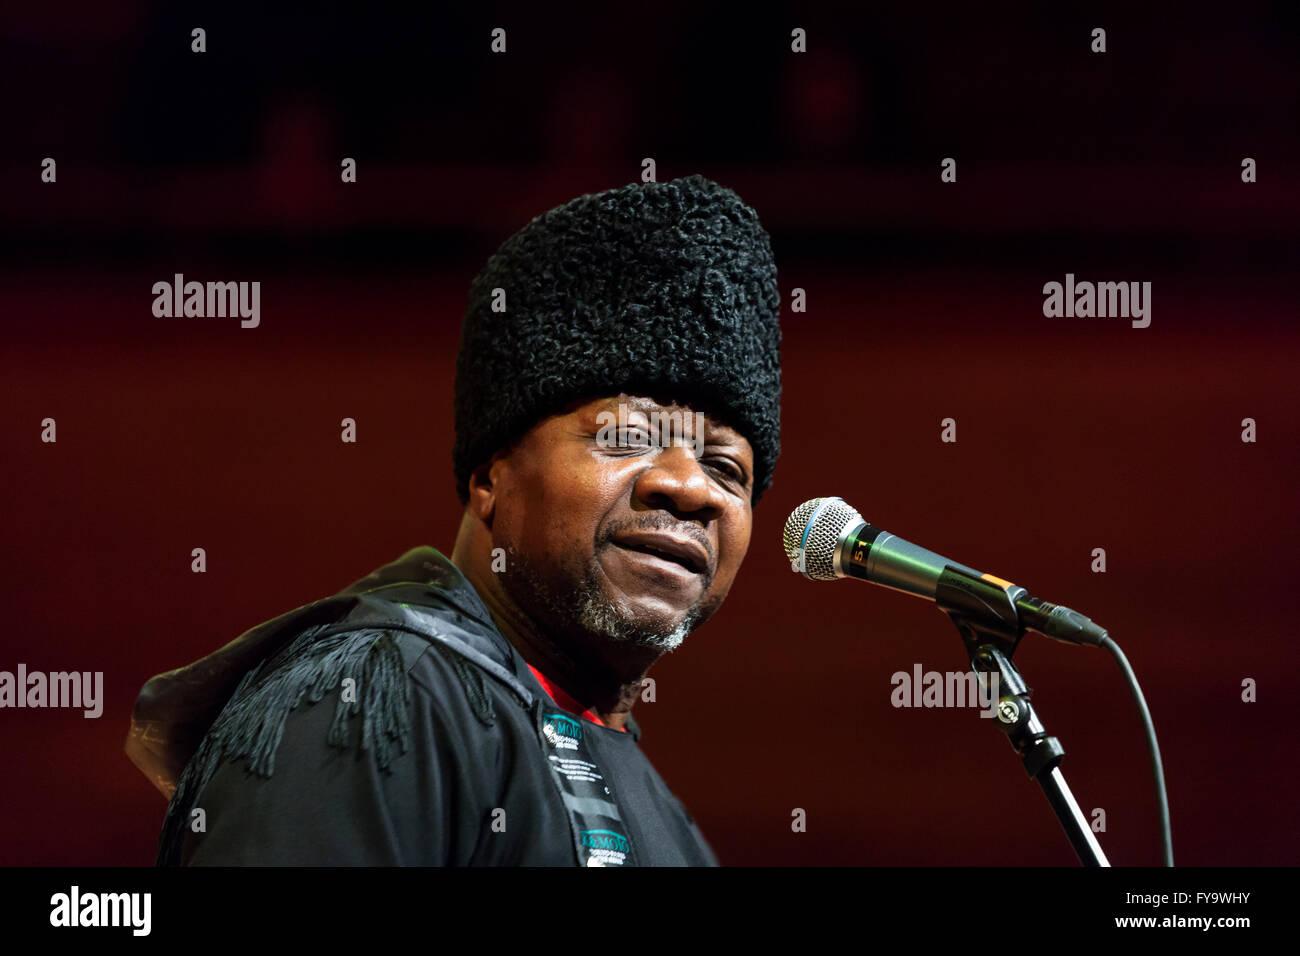 Papa Wemba (1949-2016) was a legendary hitmaker and one of the greatest music stars from the African continent. Archive photo. Stock Photo